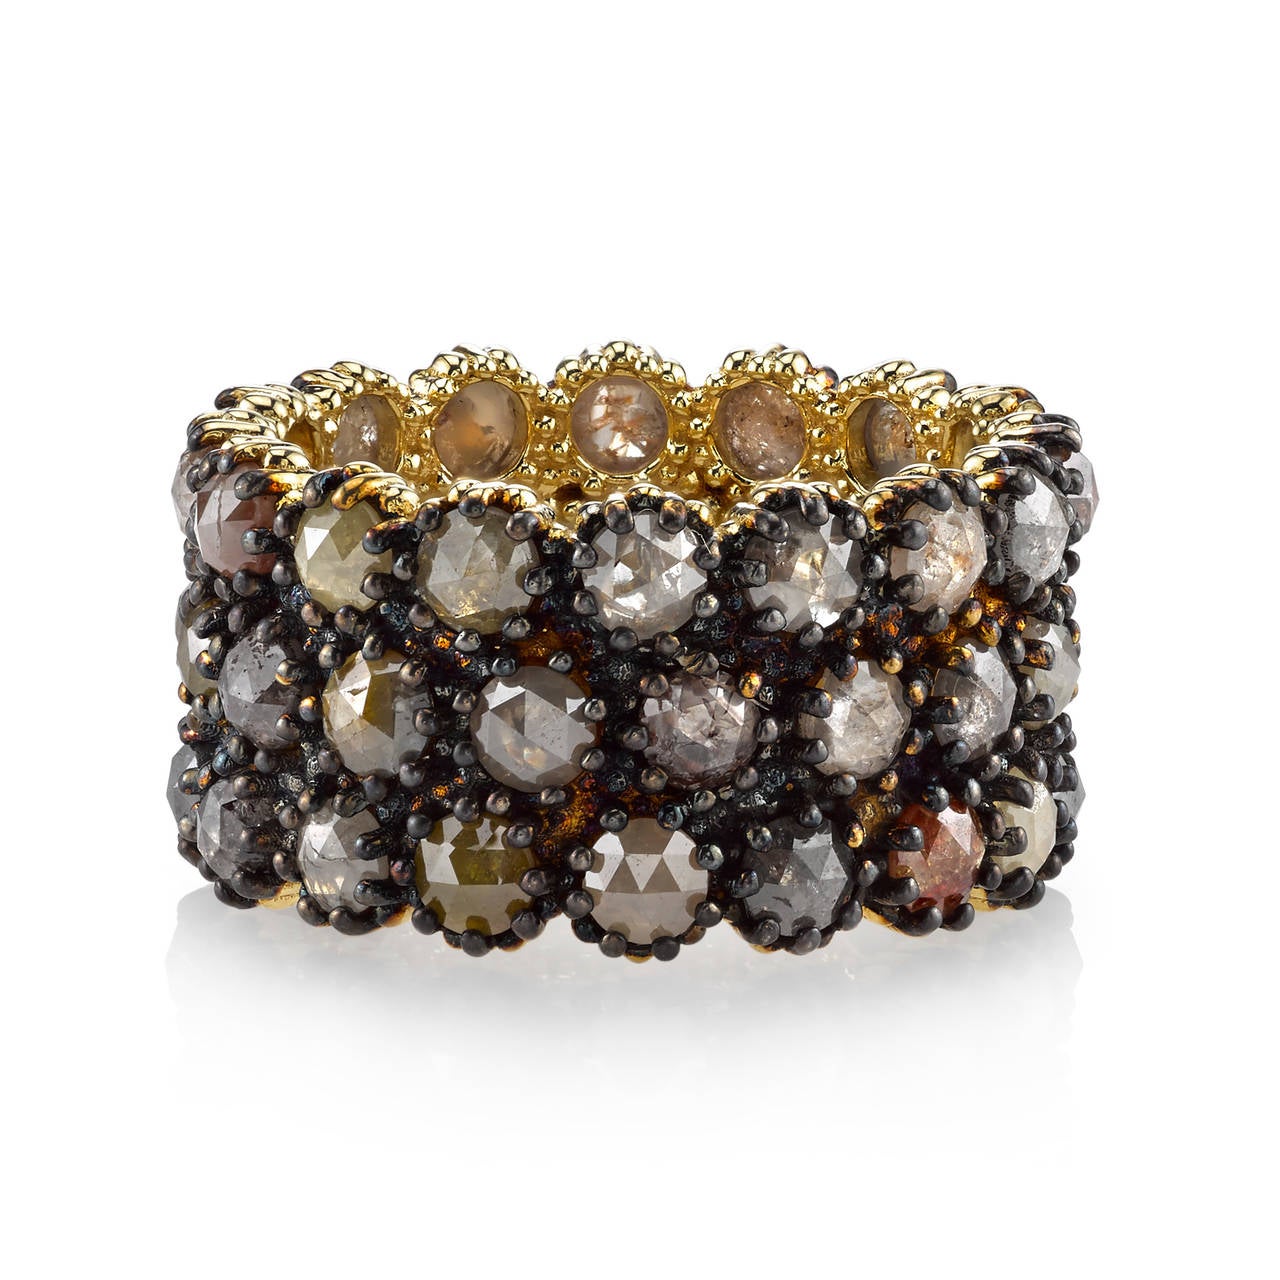 This 18 Karat Yellow Gold band is perfect for a woman on the cutting edge of style that isn't afraid to make a bold statemenet. The Black Rhodium finish perfectly comliments the muted, Earth tones of the Rustic Diamonds that elegantly wrap around